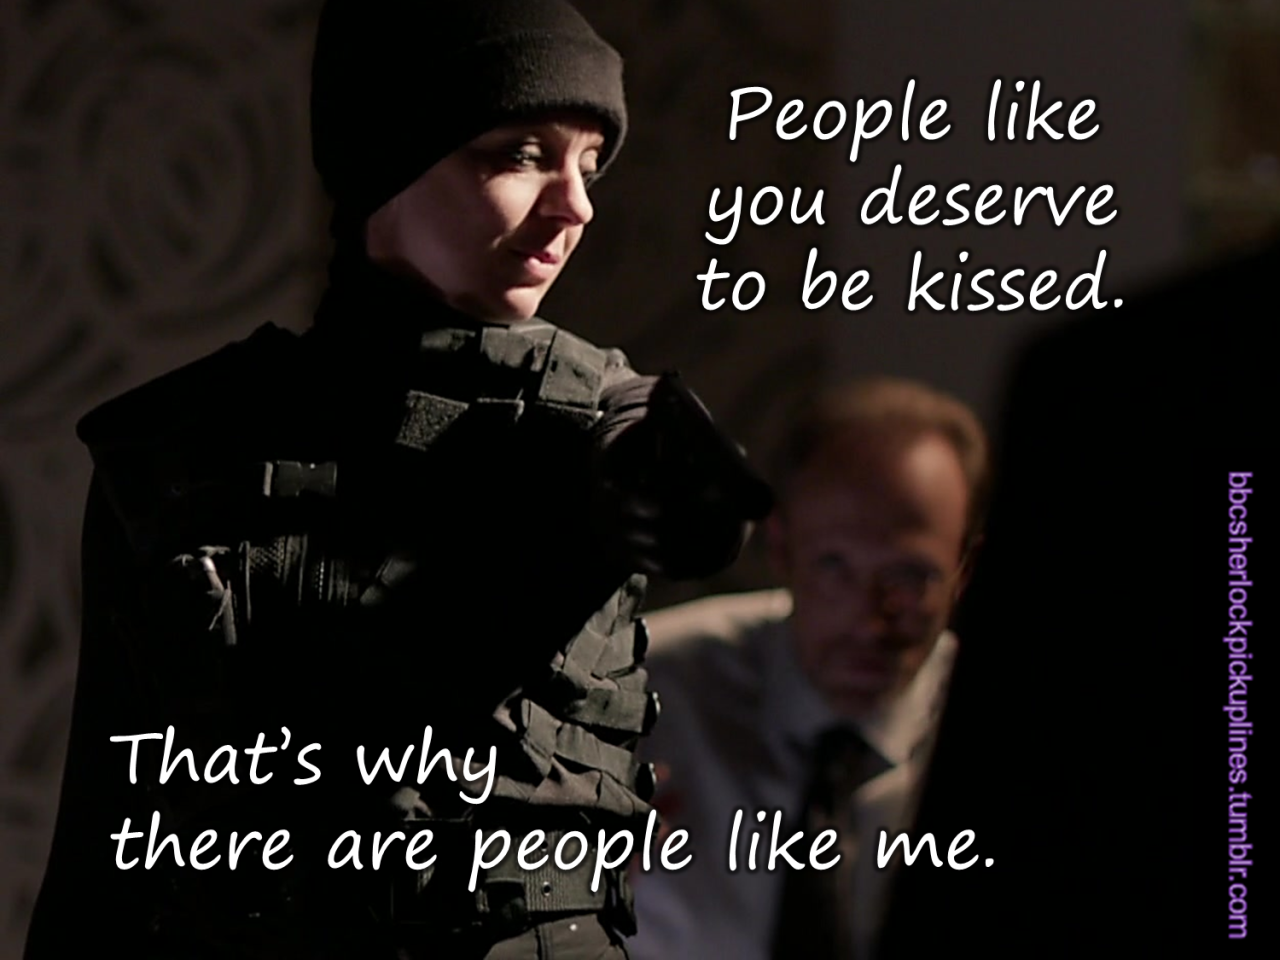 &ldquo;People like you deserve to be kissed. That&rsquo;s why there are people